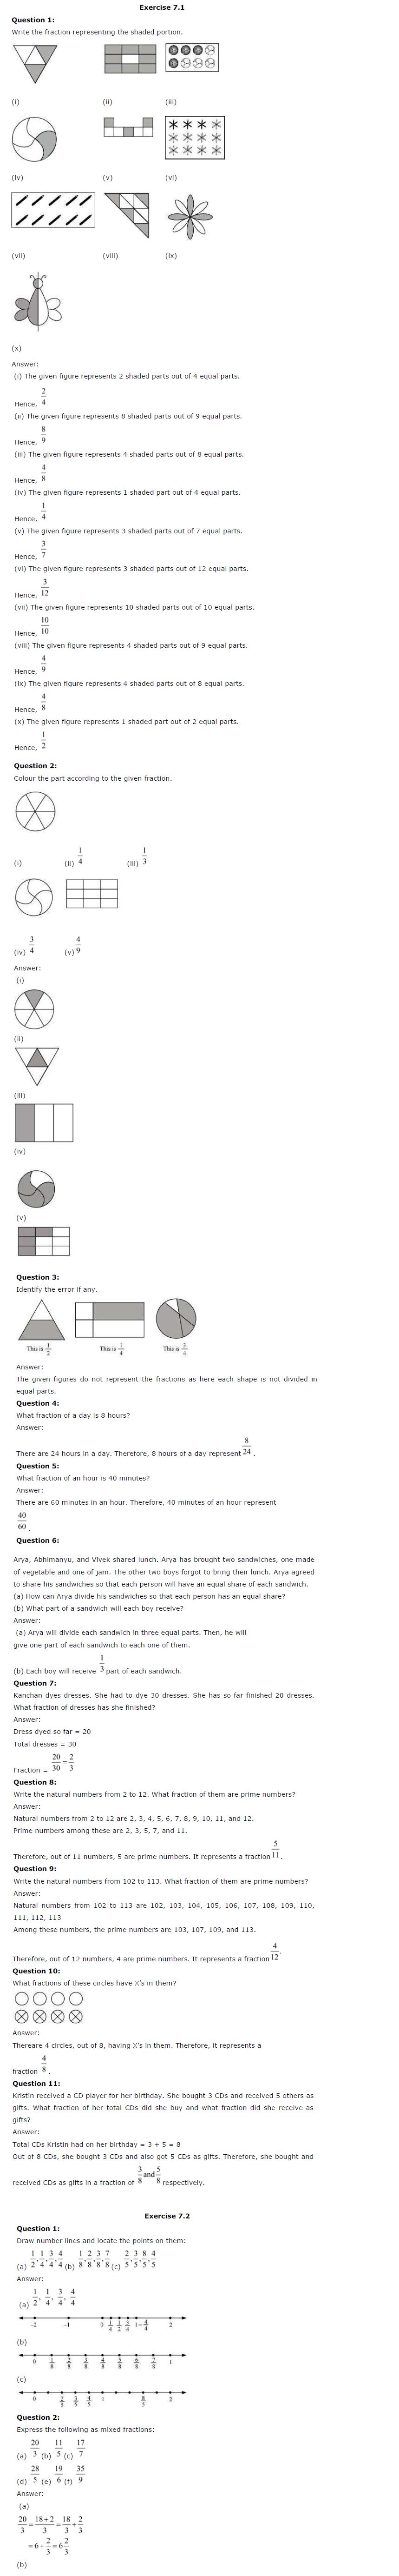 NCERT Solutions For Class 6 Maths Chapter 7 Fractions PDF Download